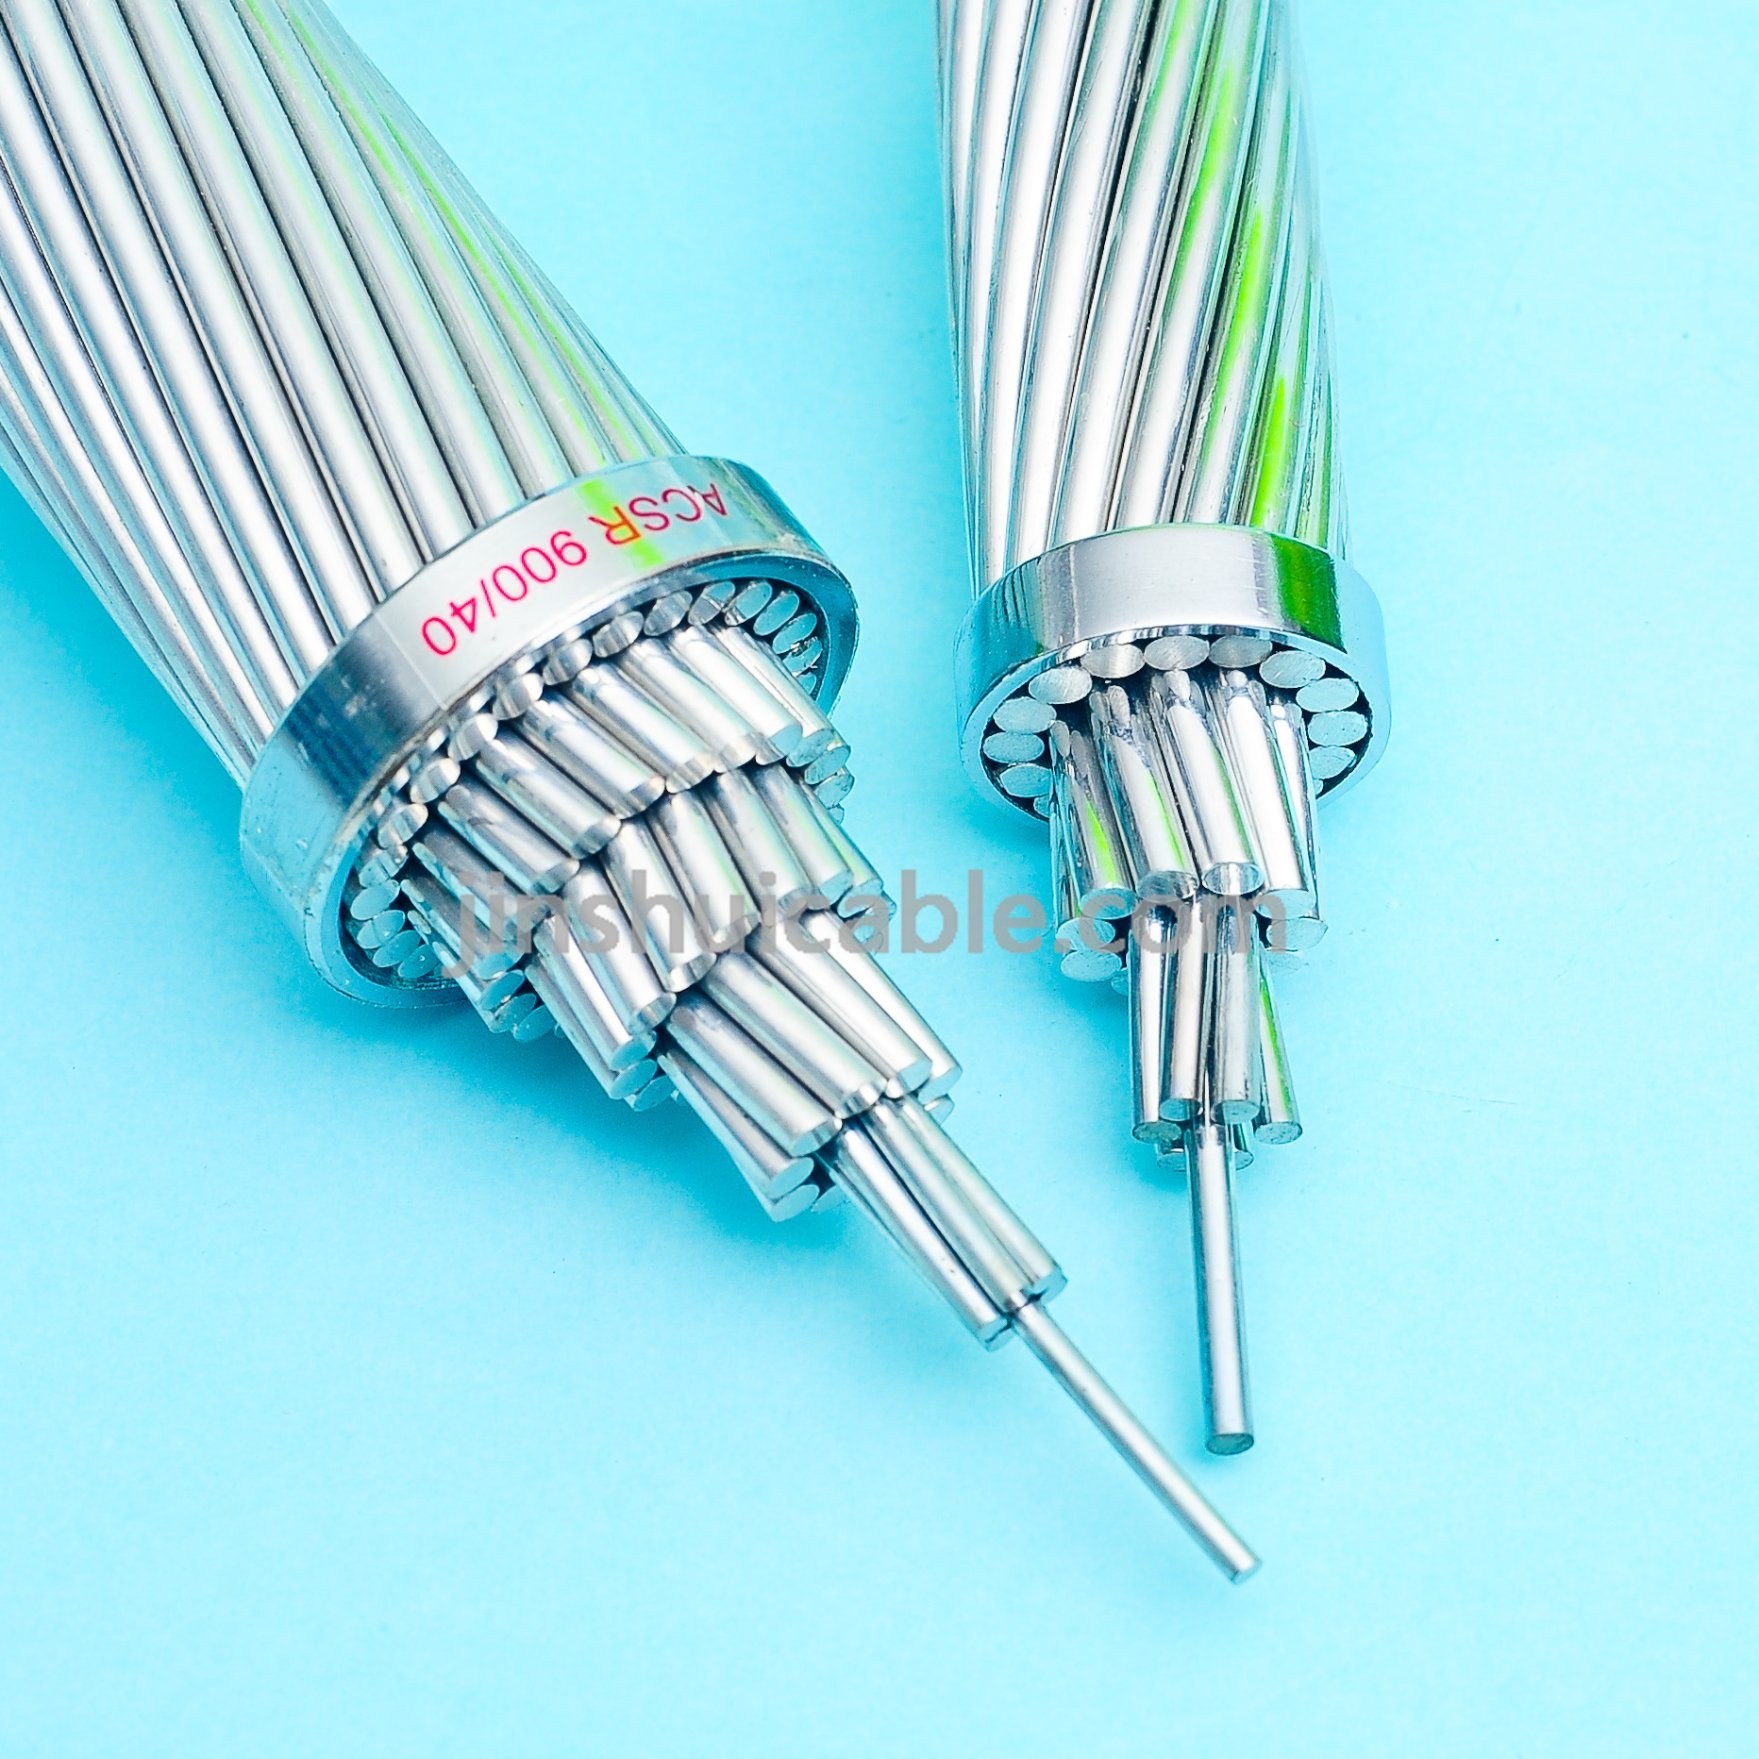 Stainless Steel Wire Strand for Overhead Bare Cable